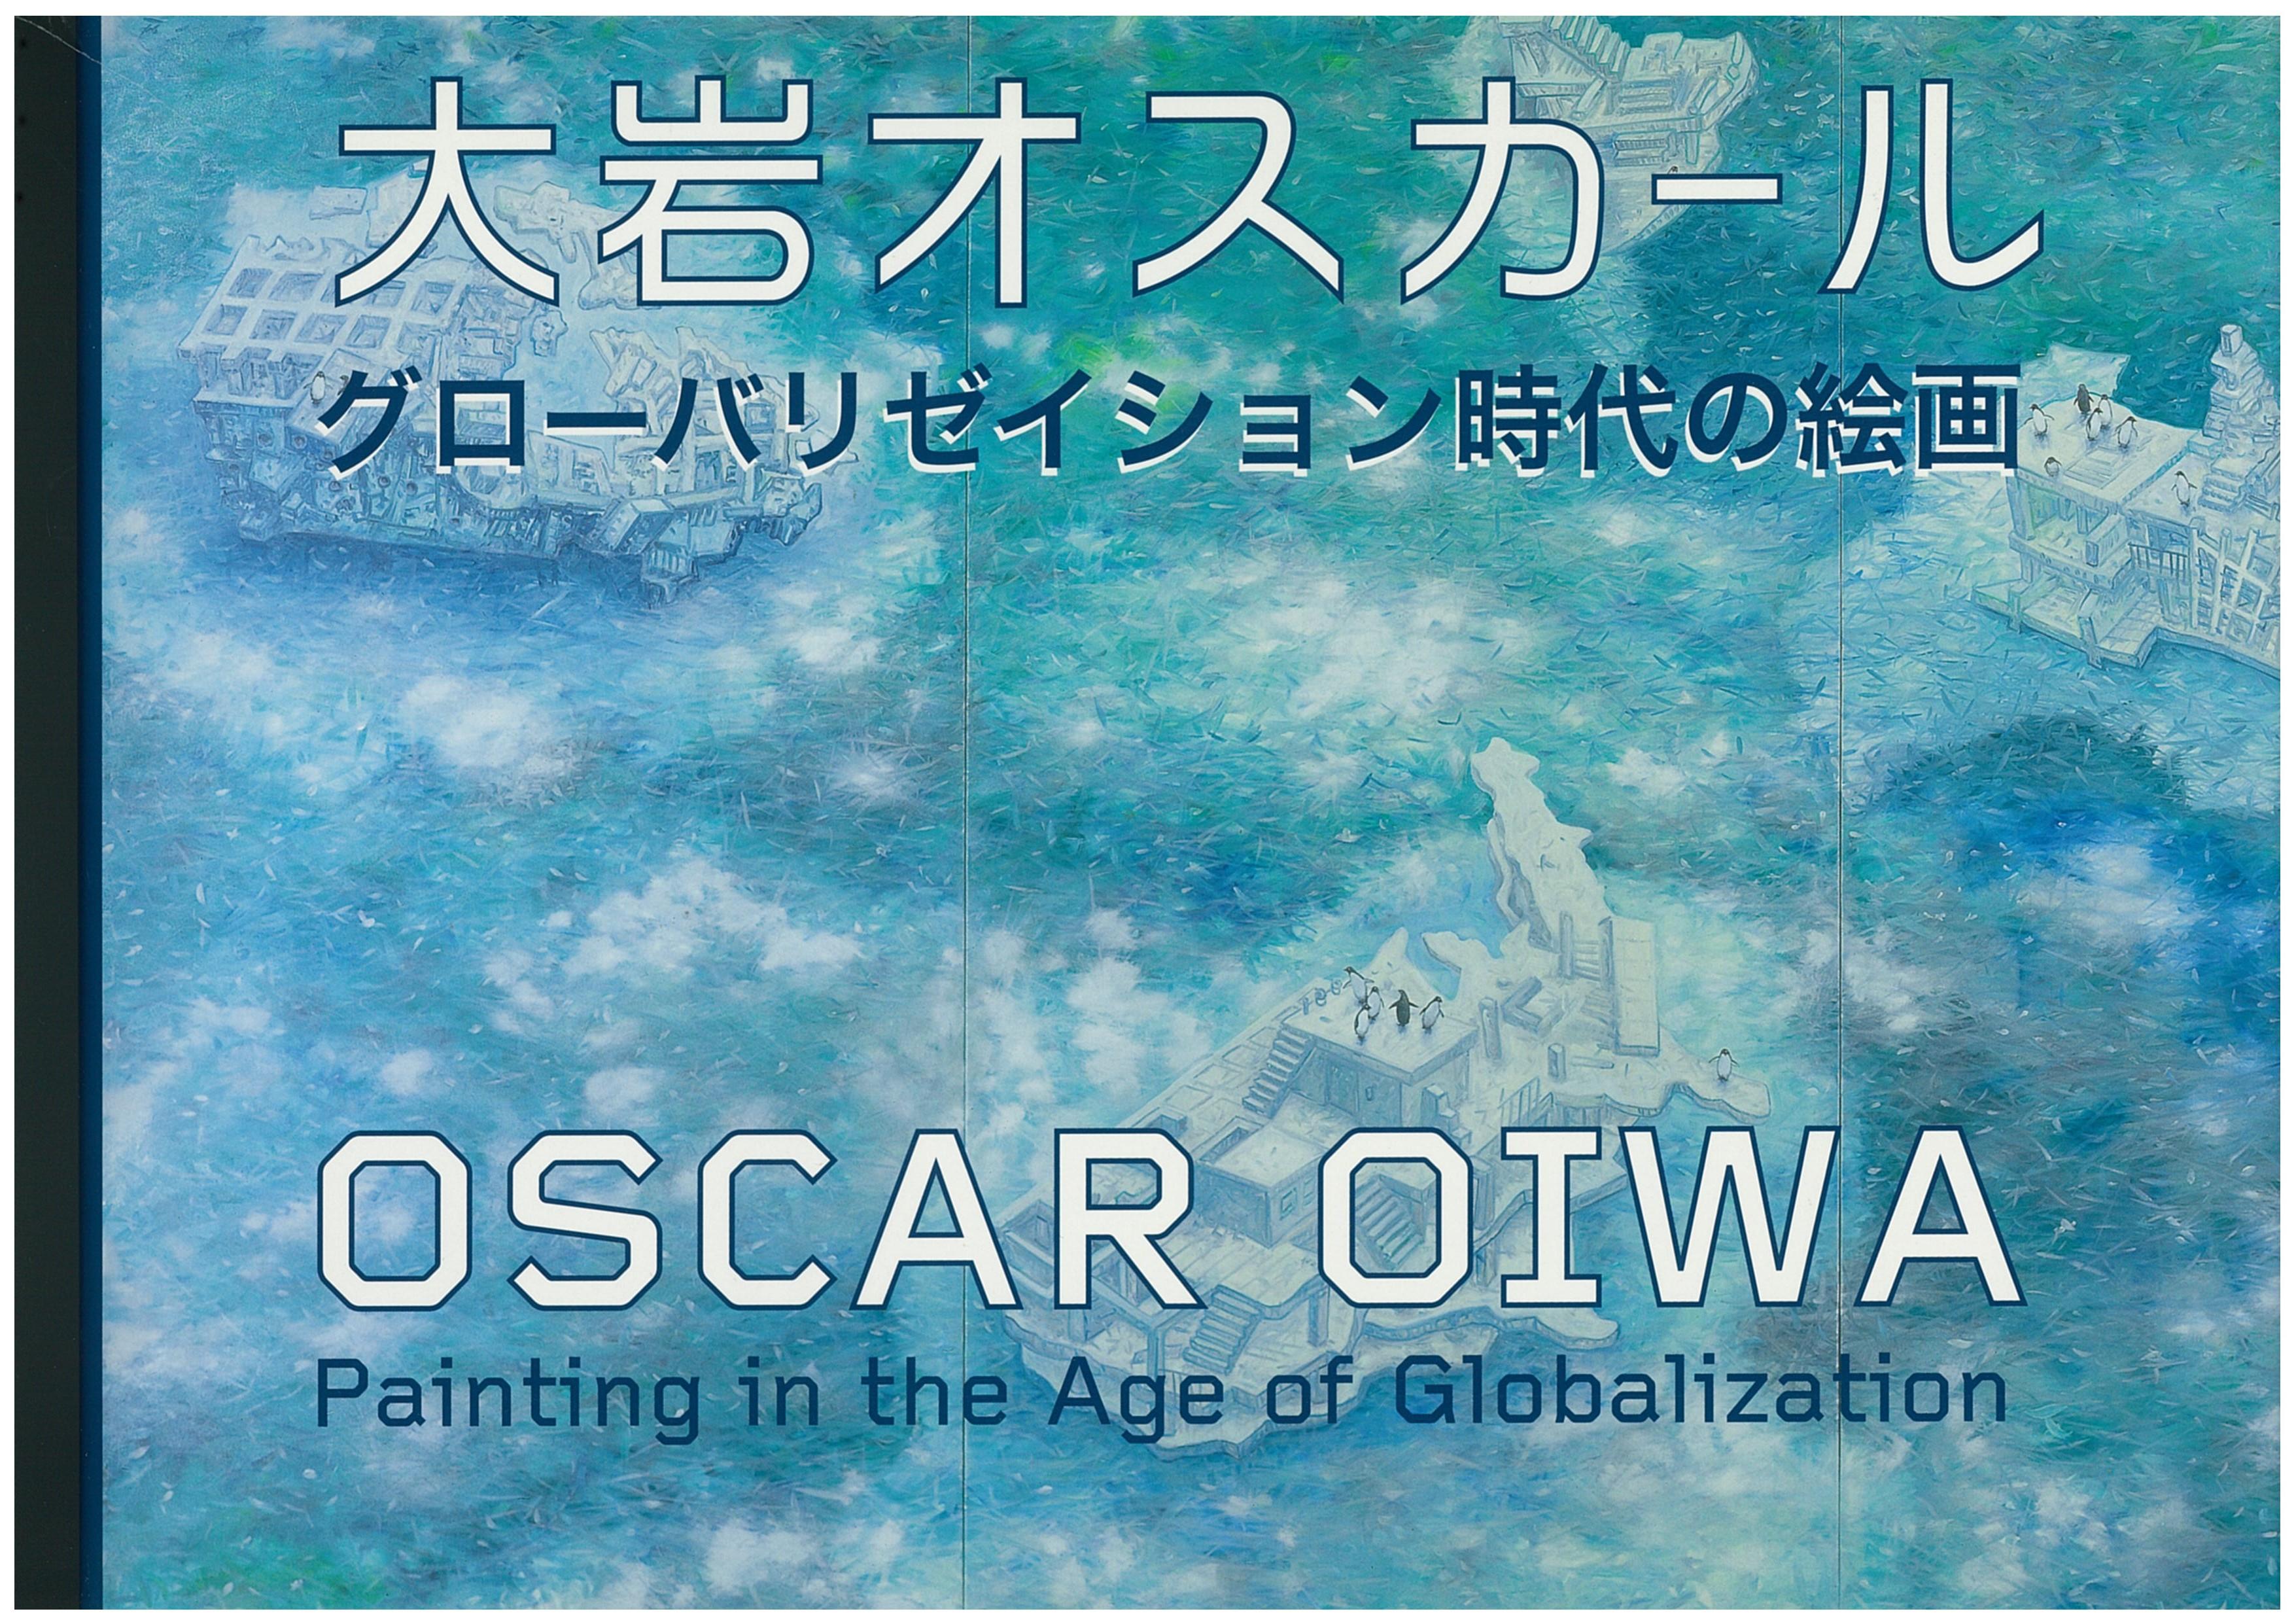 Oscar Oiwa： Painting in the Age of Globalization